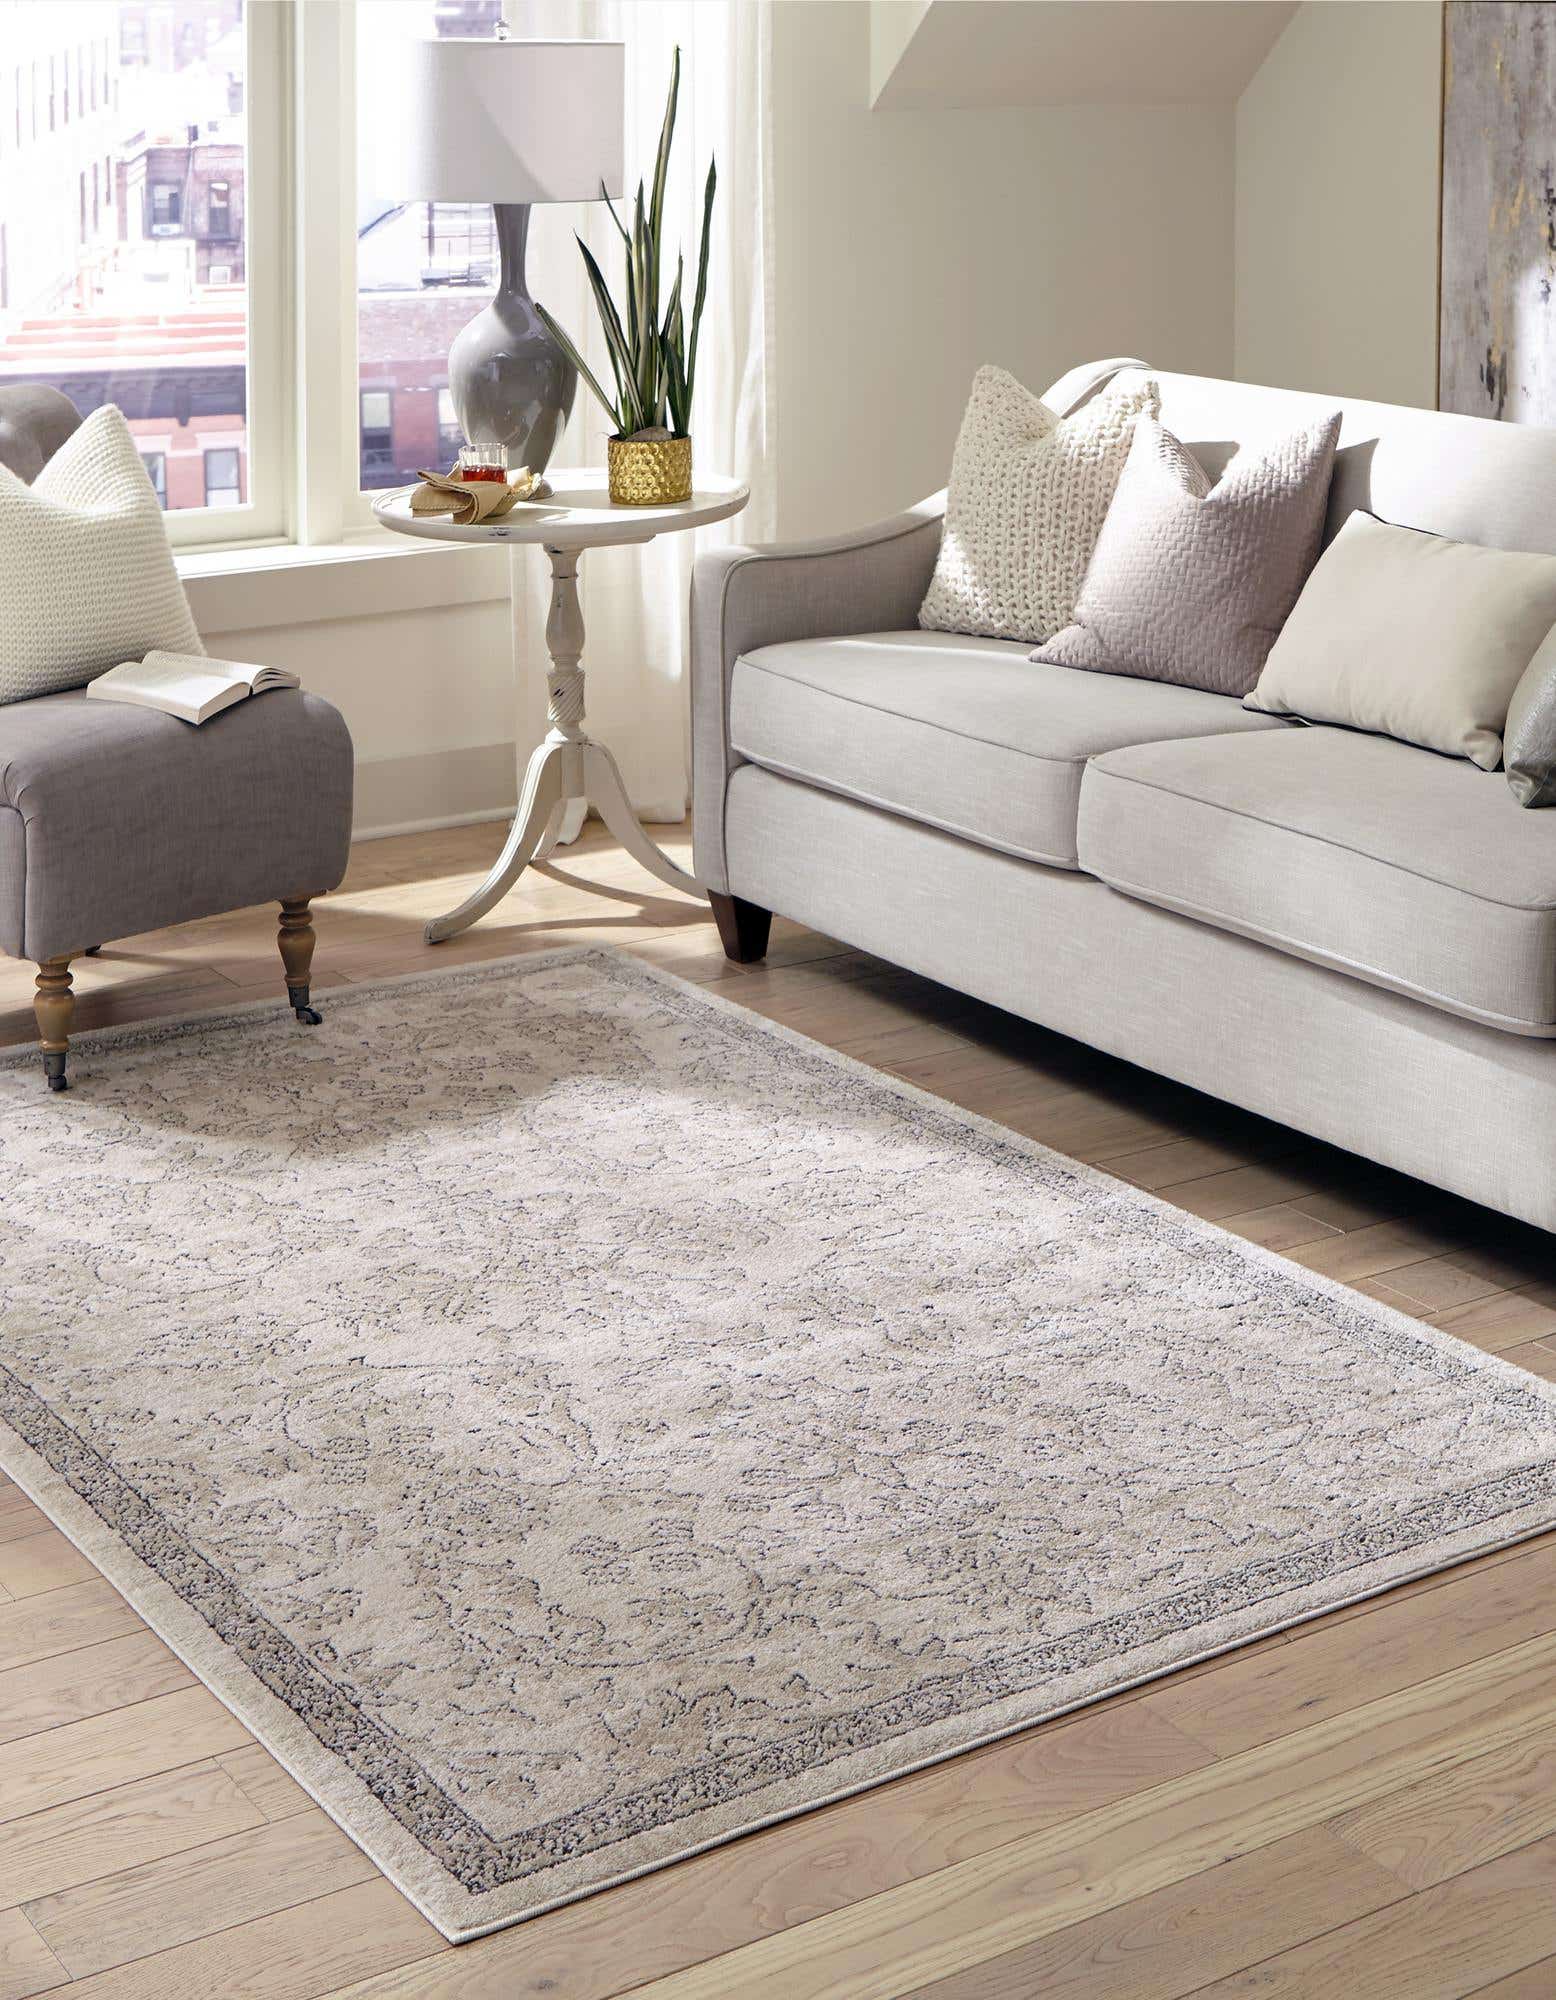 Traditional and cozy living room from Rugs.com